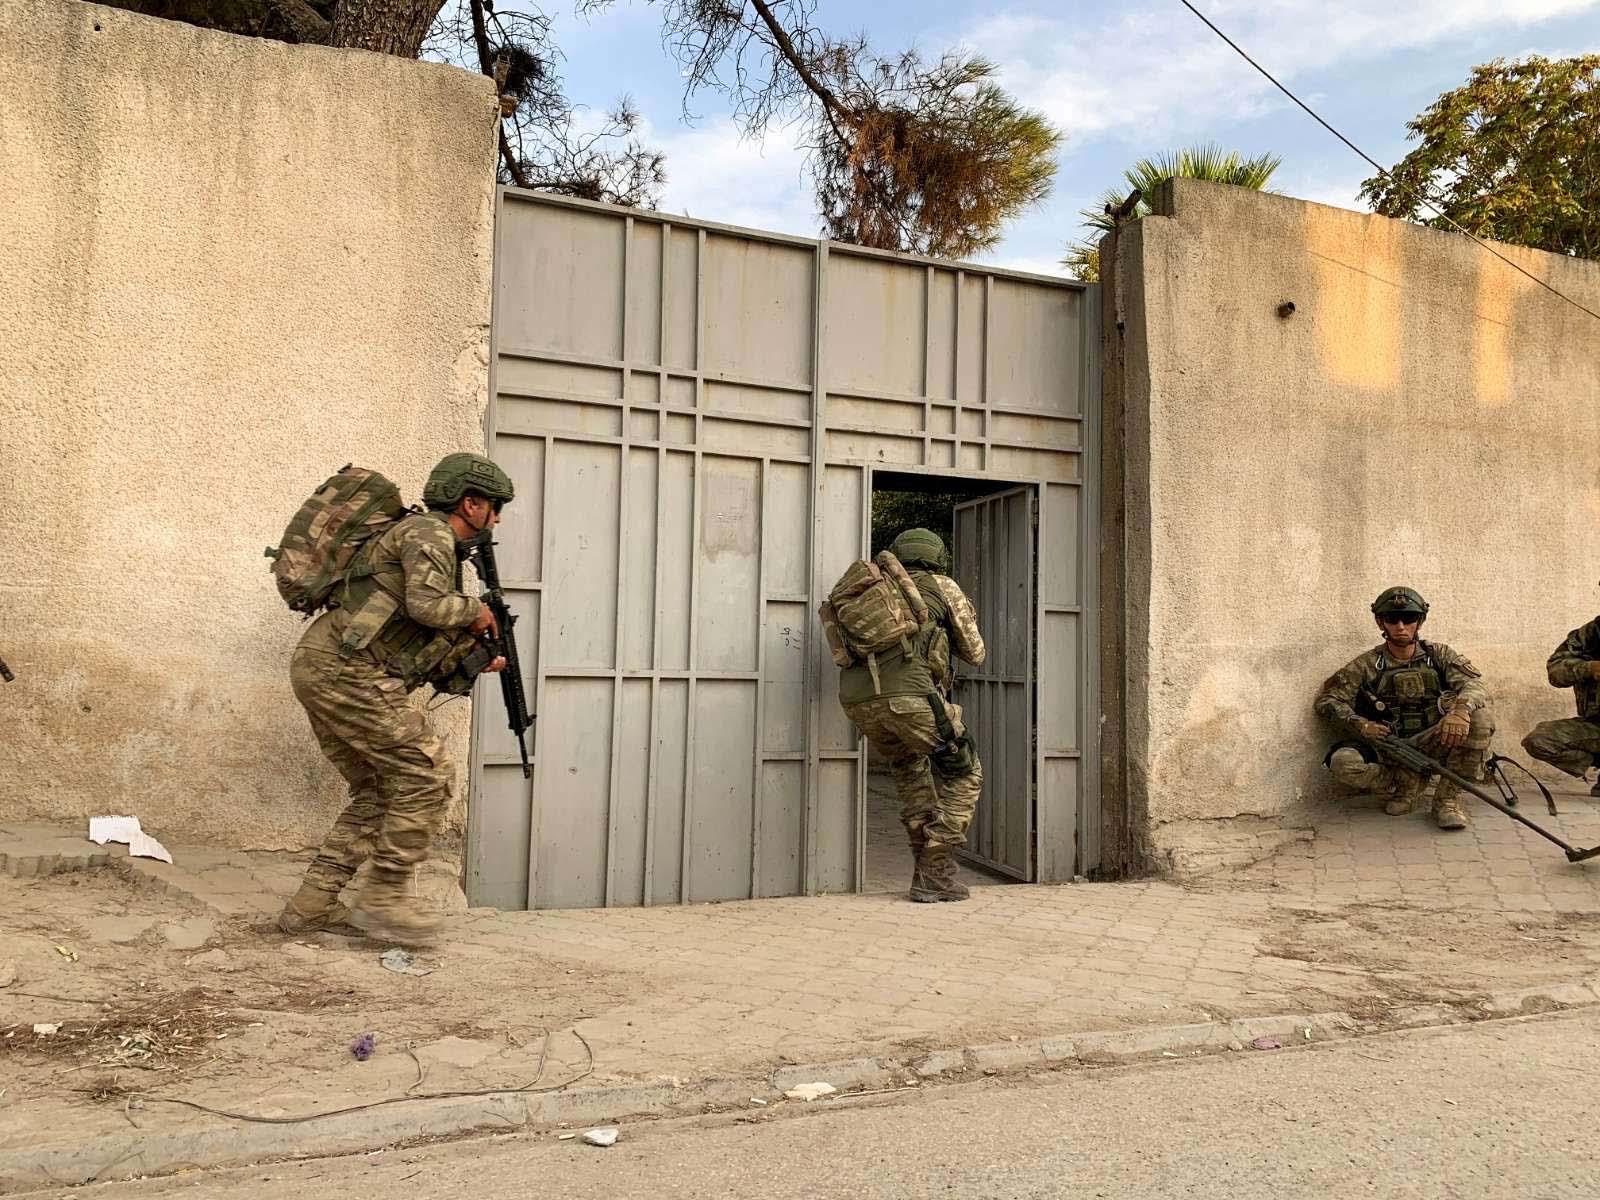 Turkish soldiers are seen in the border town of Tal Abyad, Syria